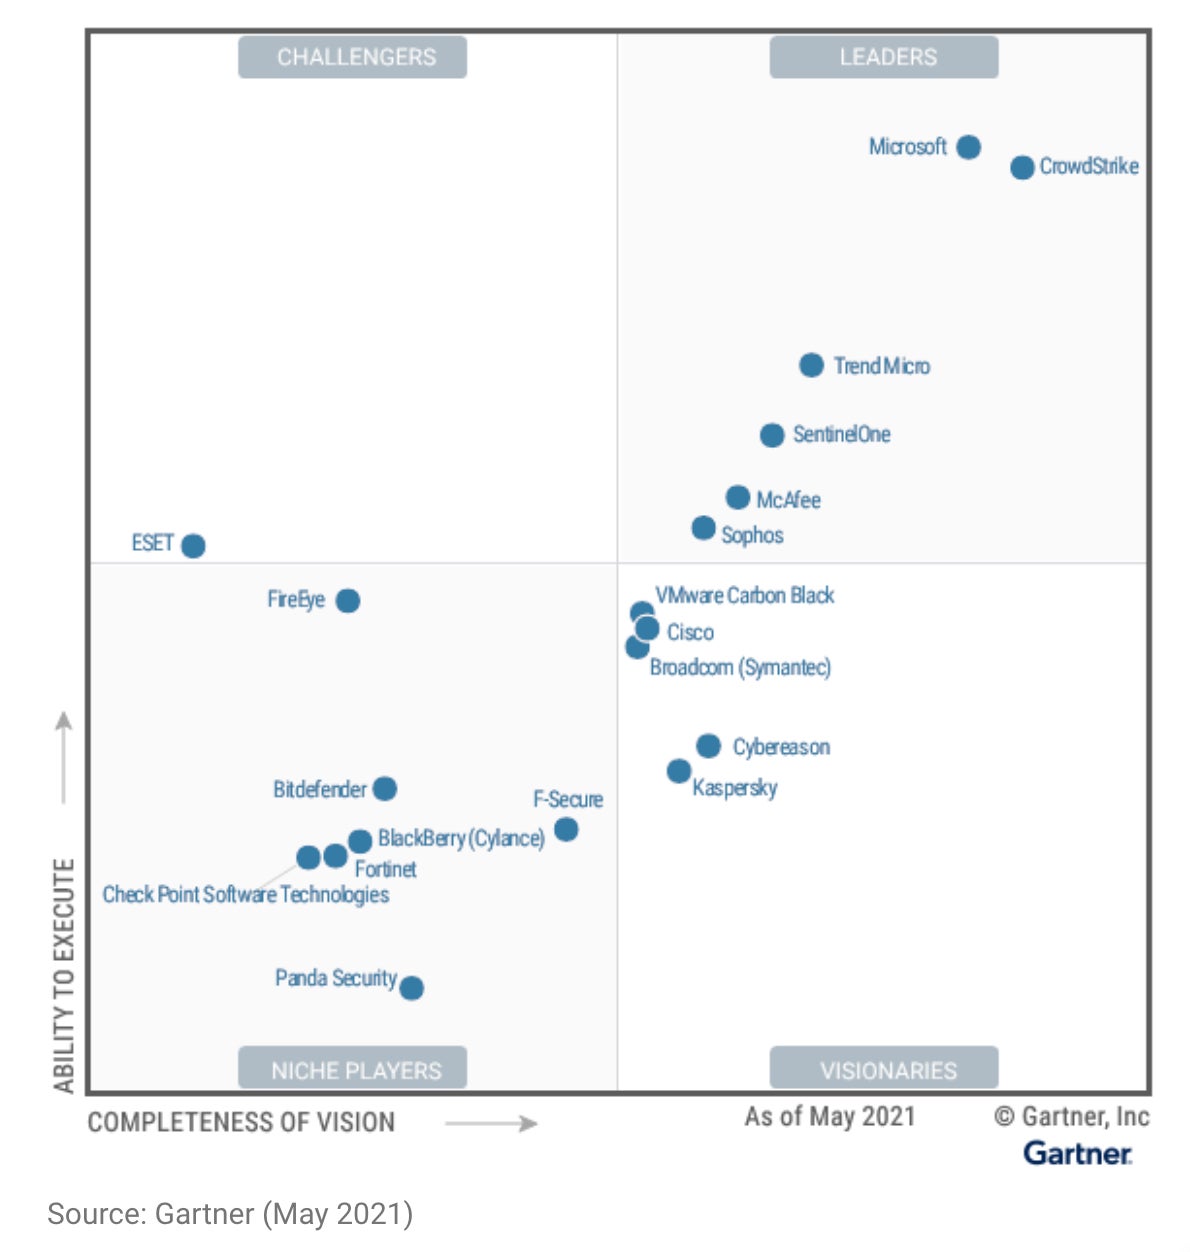 SentinelOne is a Leader in the 2021 Gartner Magic Quadrant for Endpoint Protection Platforms